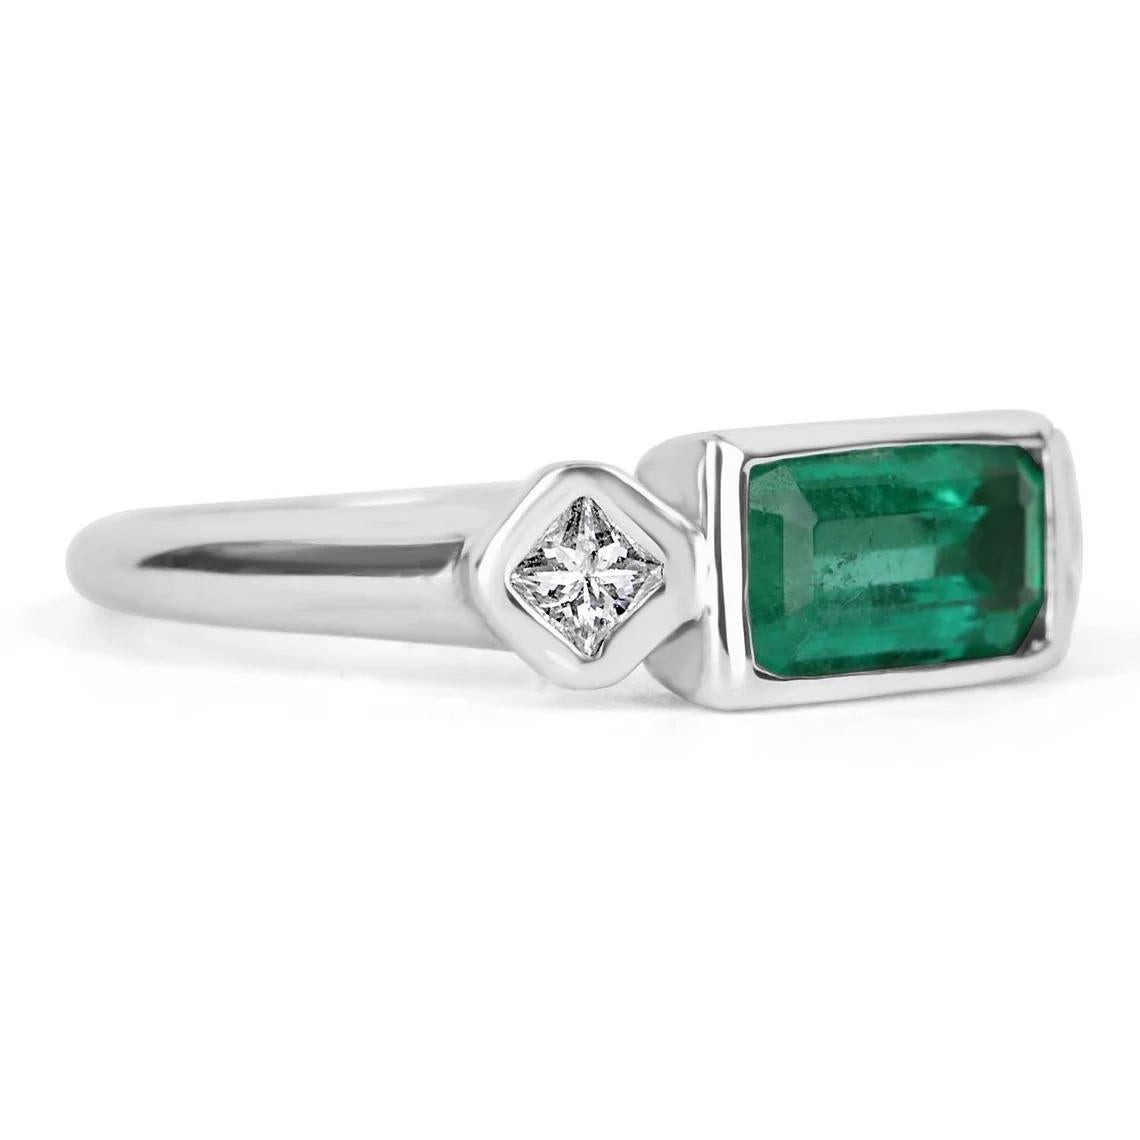 A Colombian emerald and princess cut three stone ring. Dexterously handcrafted in gleaming 18K white gold, this ring features a 1.40-carat natural elongated emerald, emerald cut from the famous Muzo mines. Set in a secure bezel setting for extra